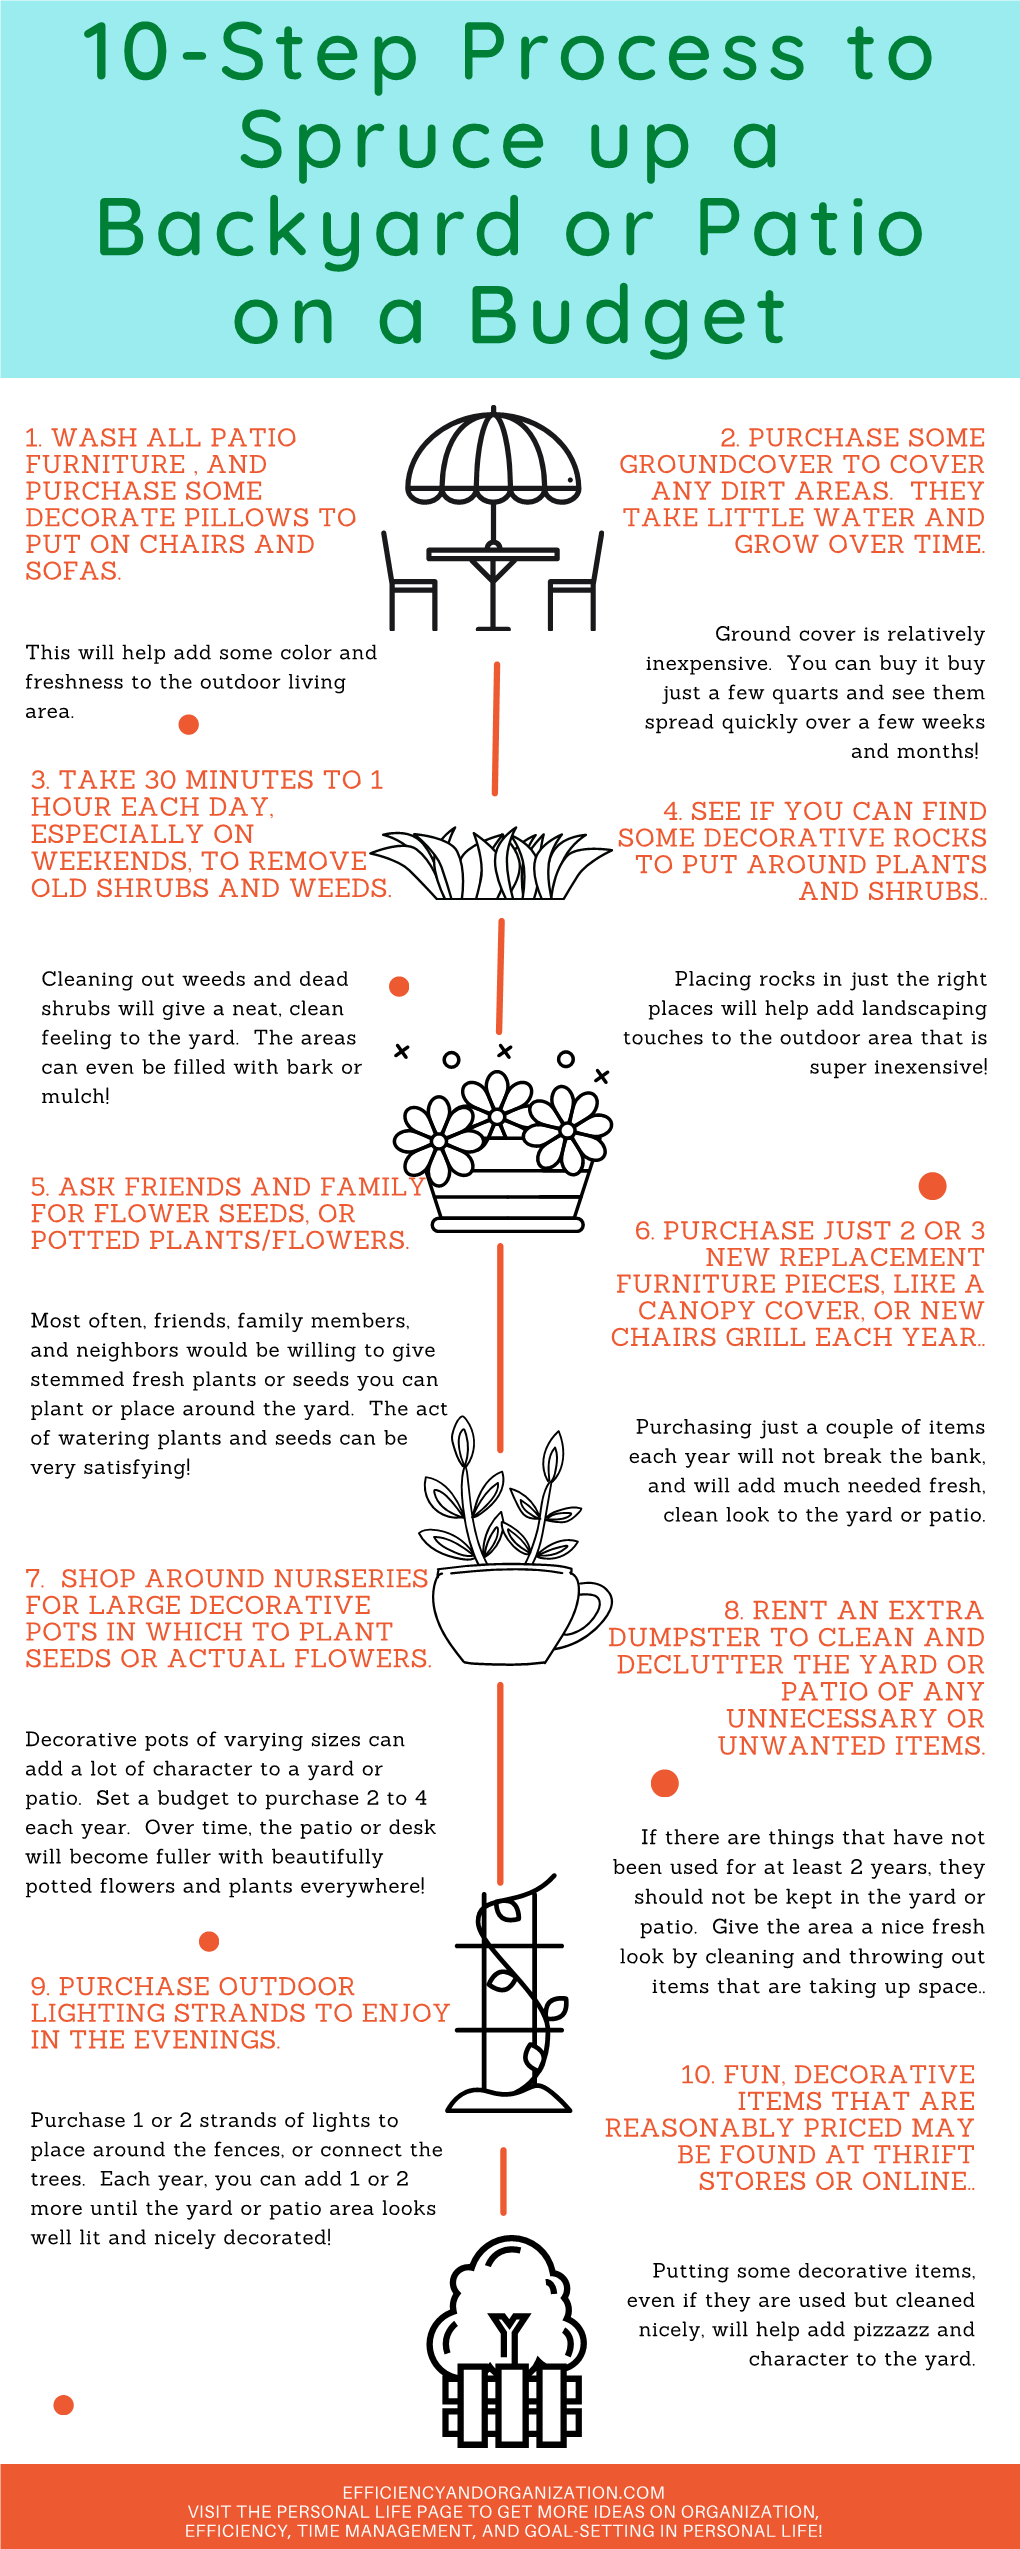 Backyard and Patio Decorating Infographic